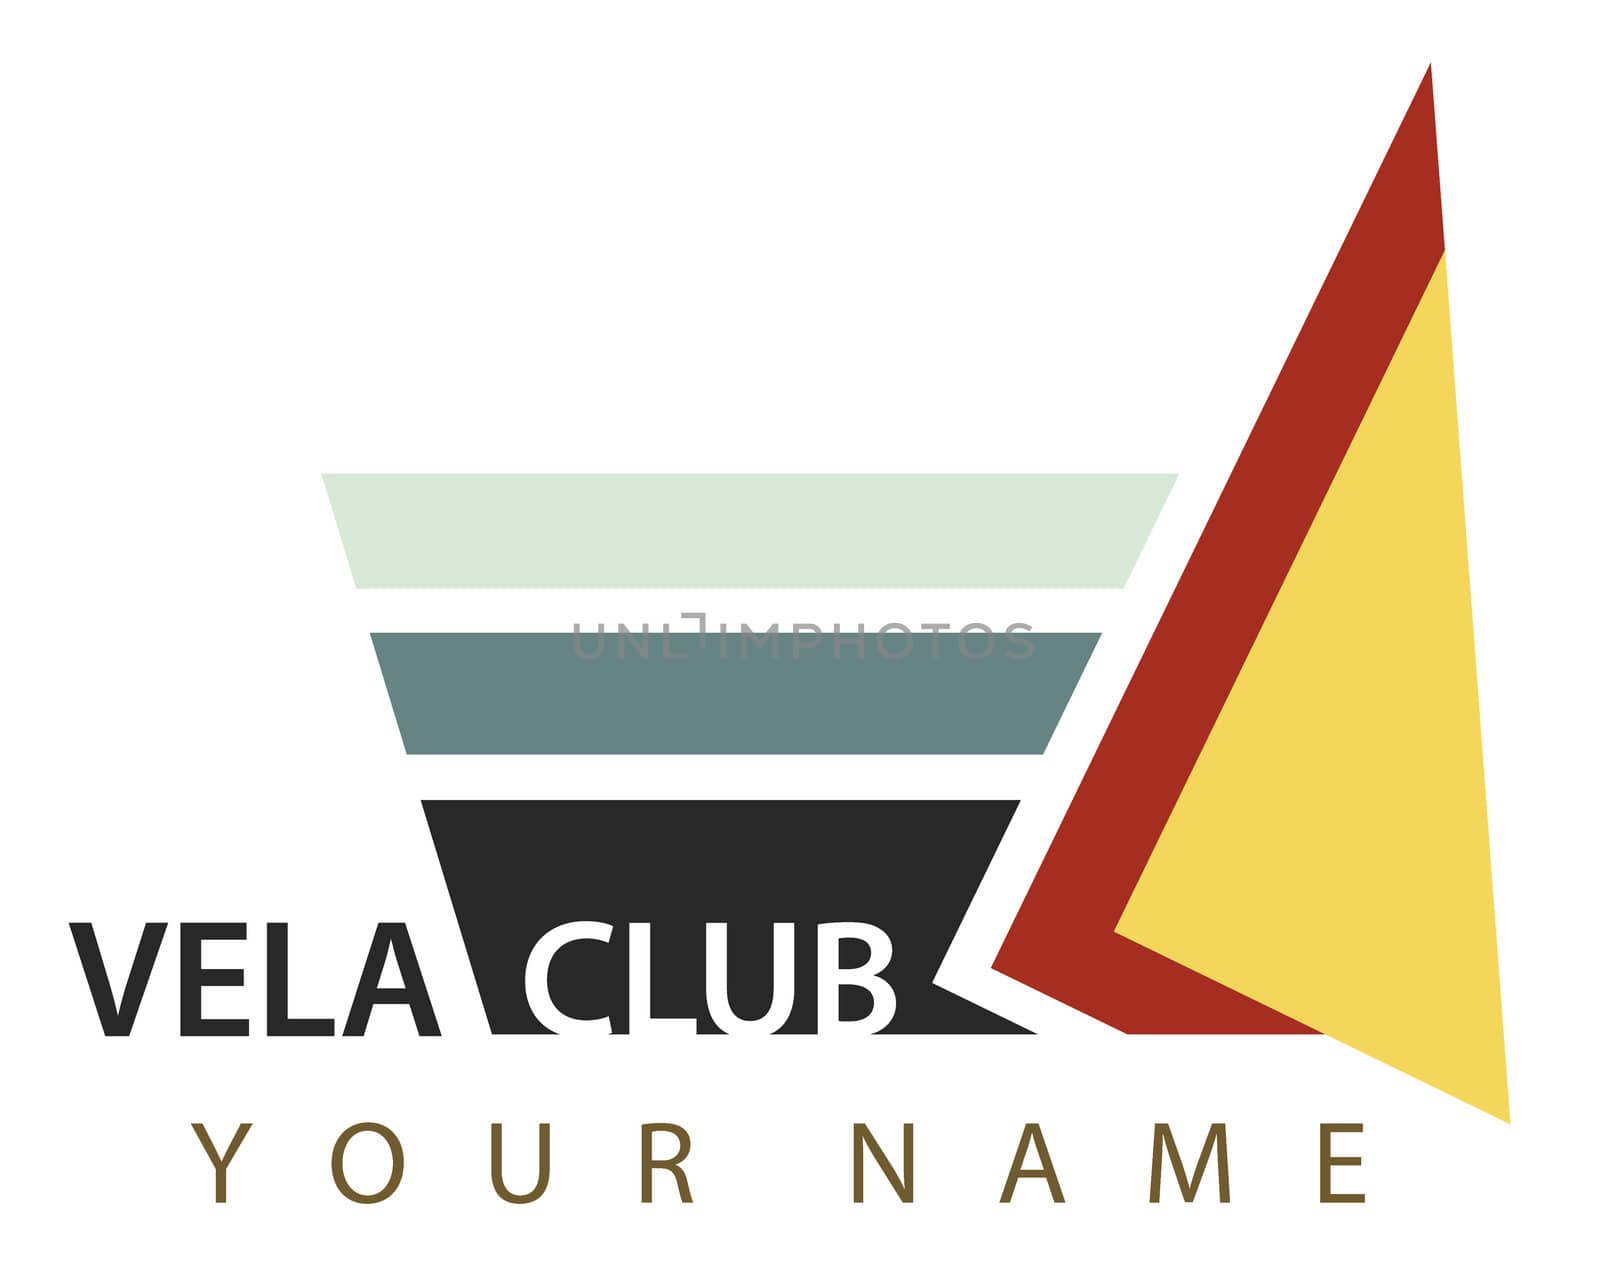 A logo suitable for a vela club: a sailboat between the waves